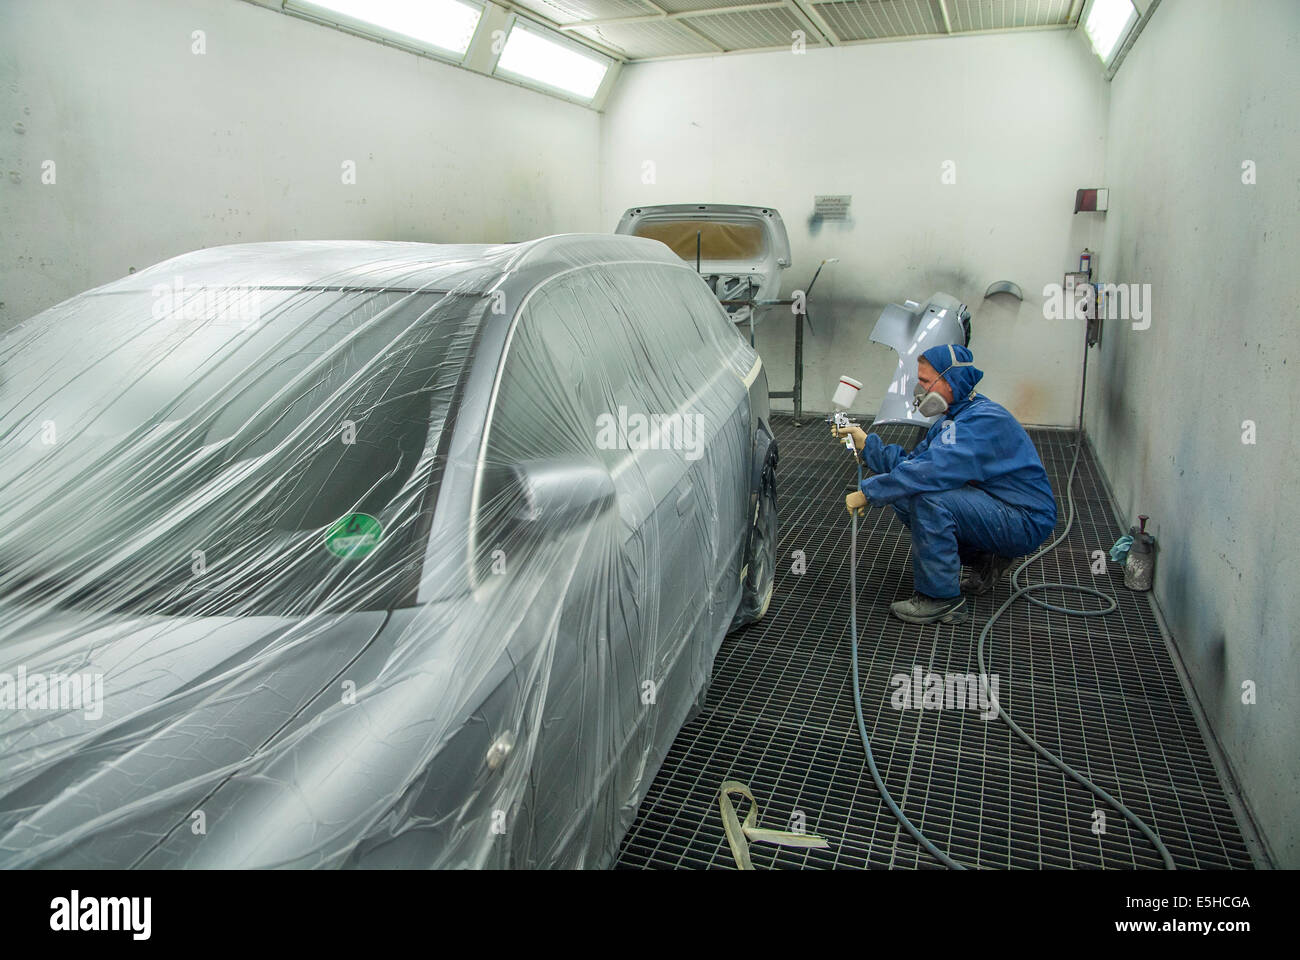 Painting an accidental damage of a car in a garage. Stock Photo